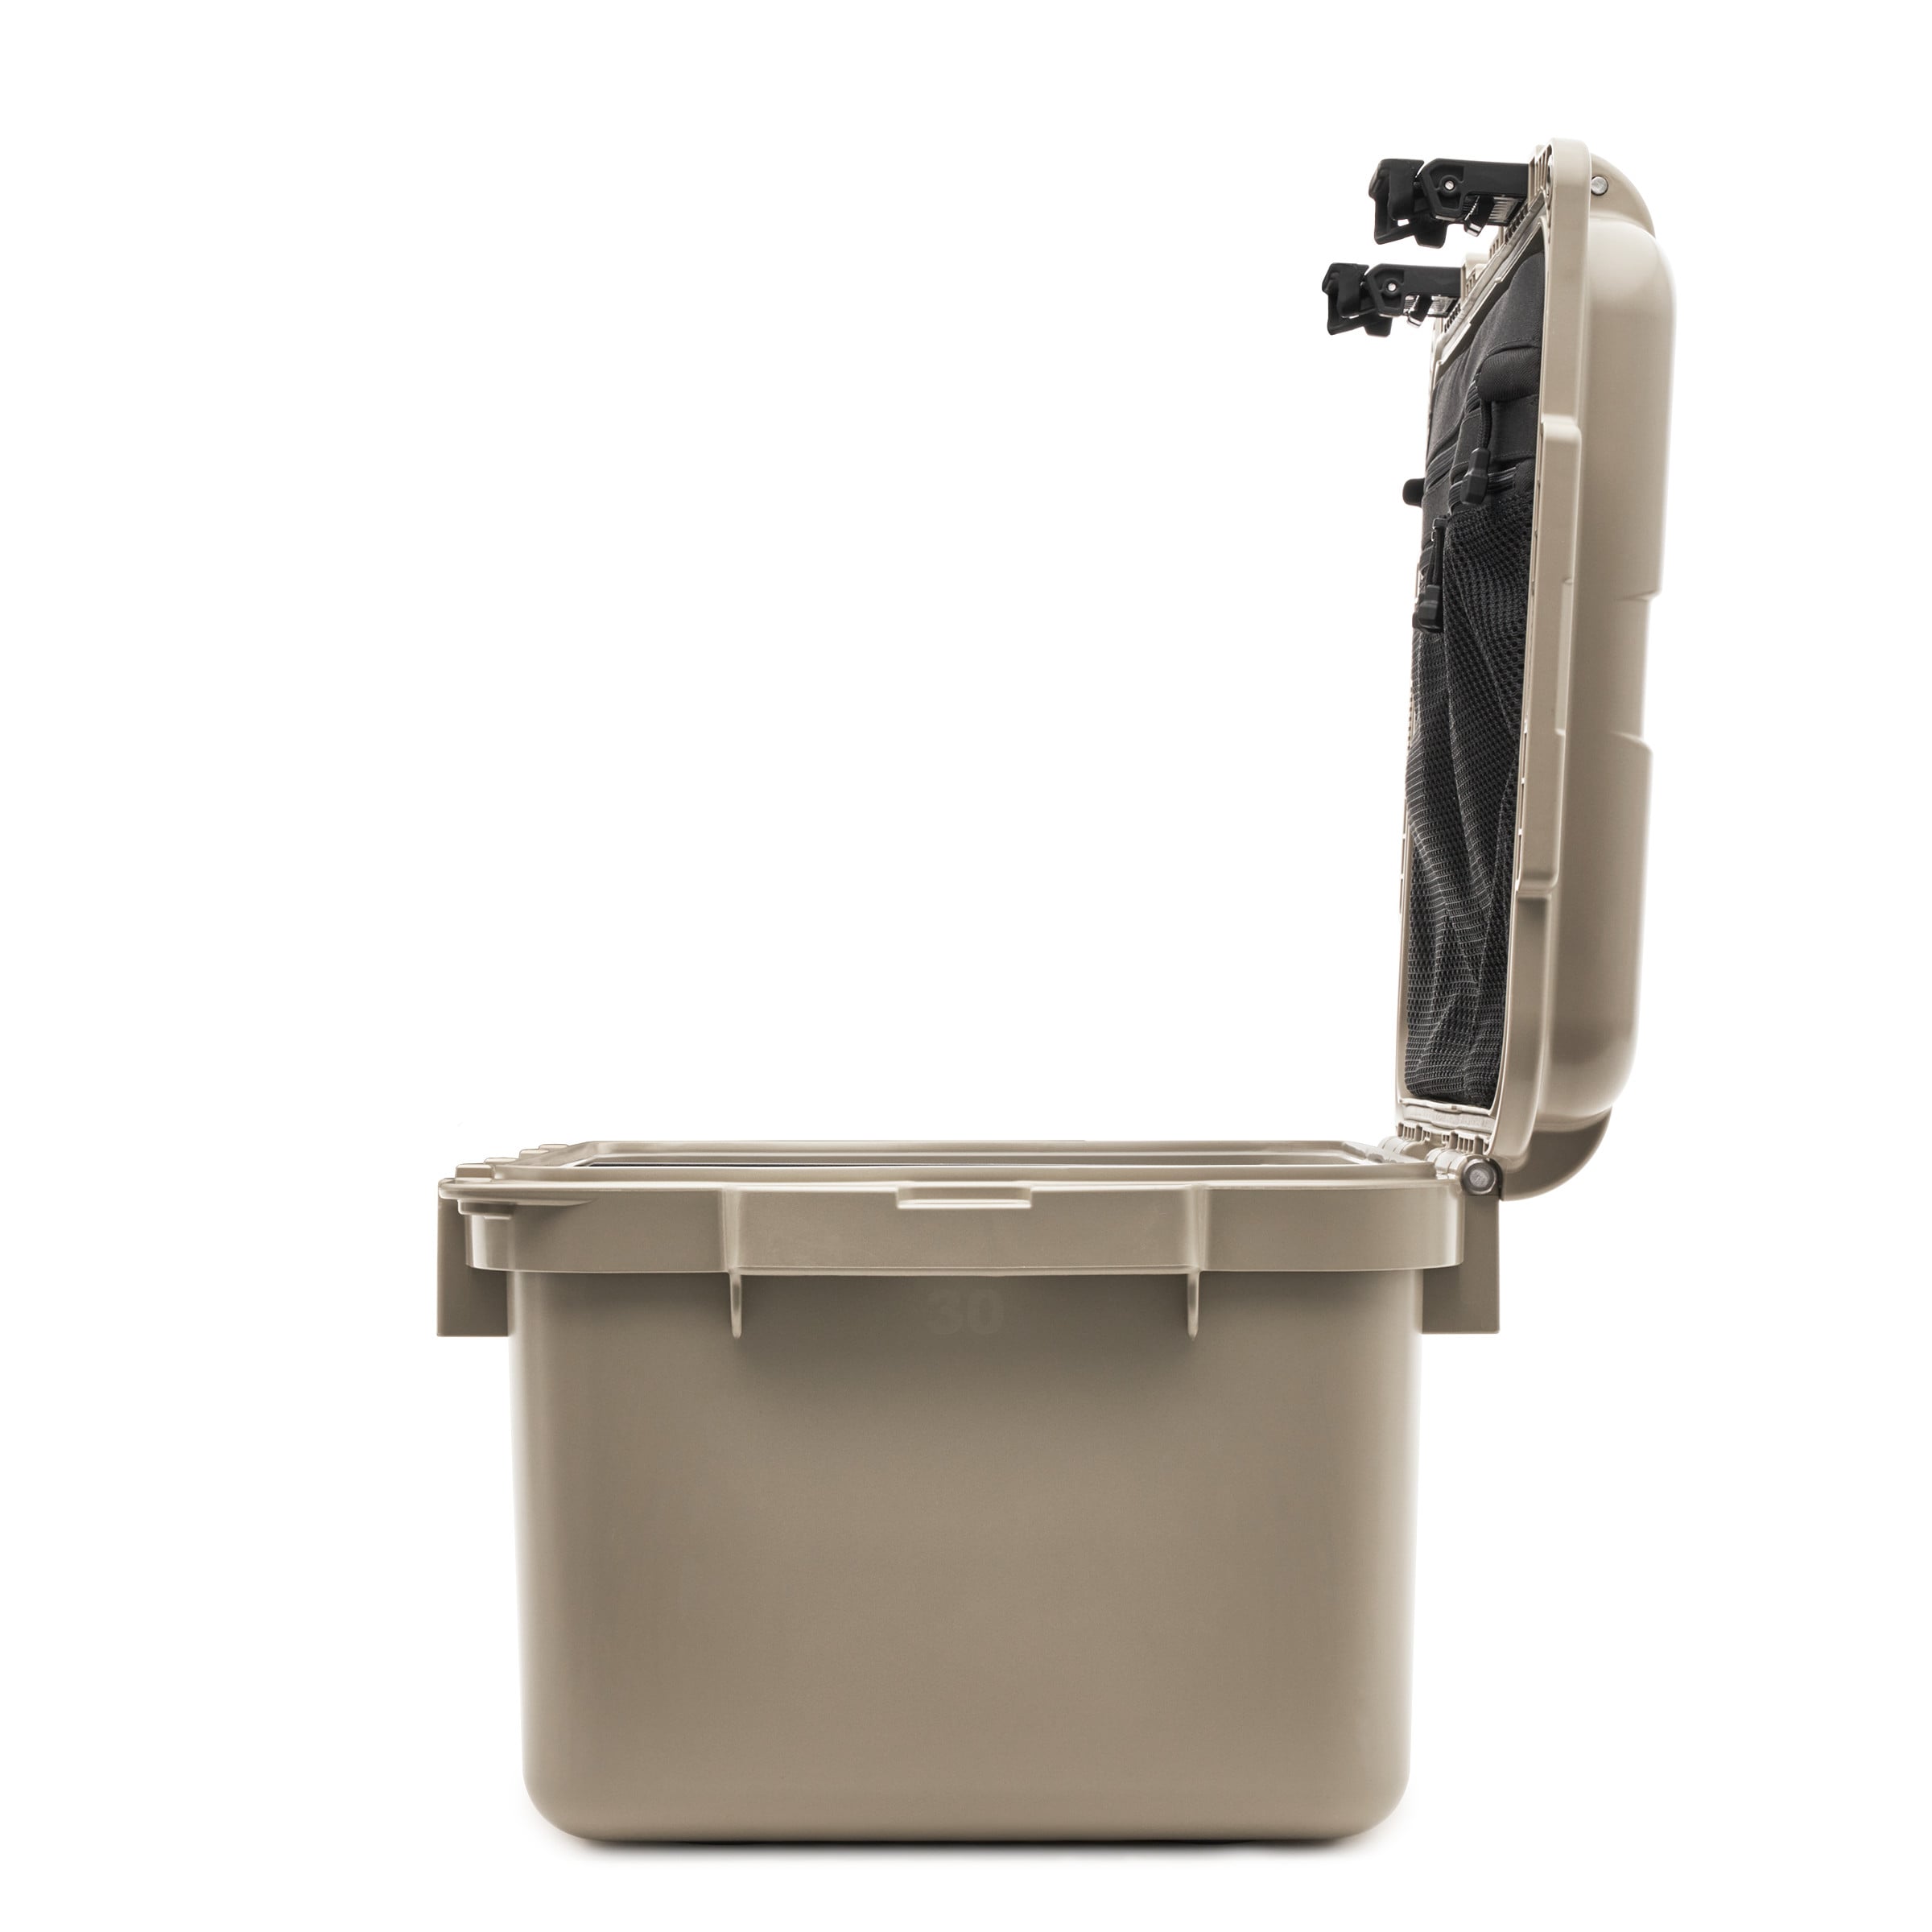  YETI LoadOut GoBox Divided Cargo Case, Tan : Sports & Outdoors